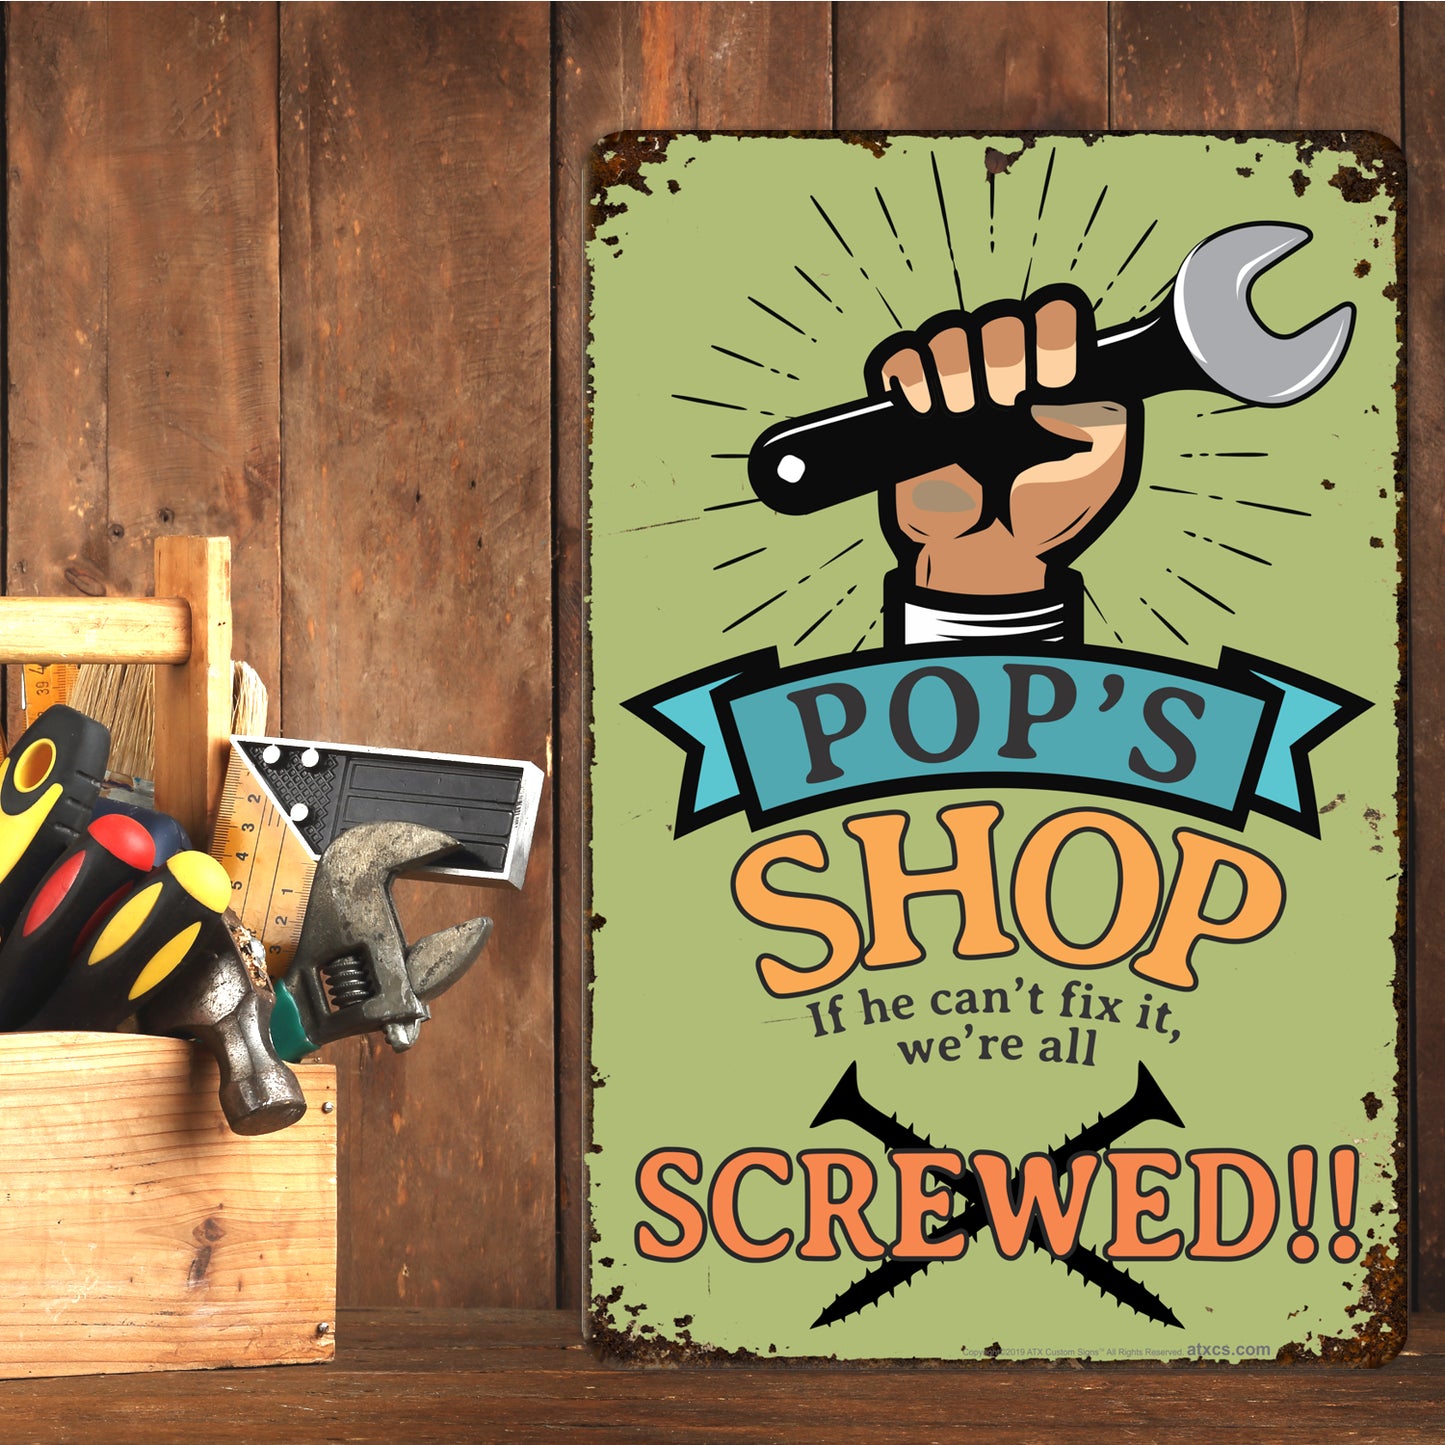 Funny Garage Signs Pop's Shop If He Can't Fix It, We're Screwed! - Size 8 x 12